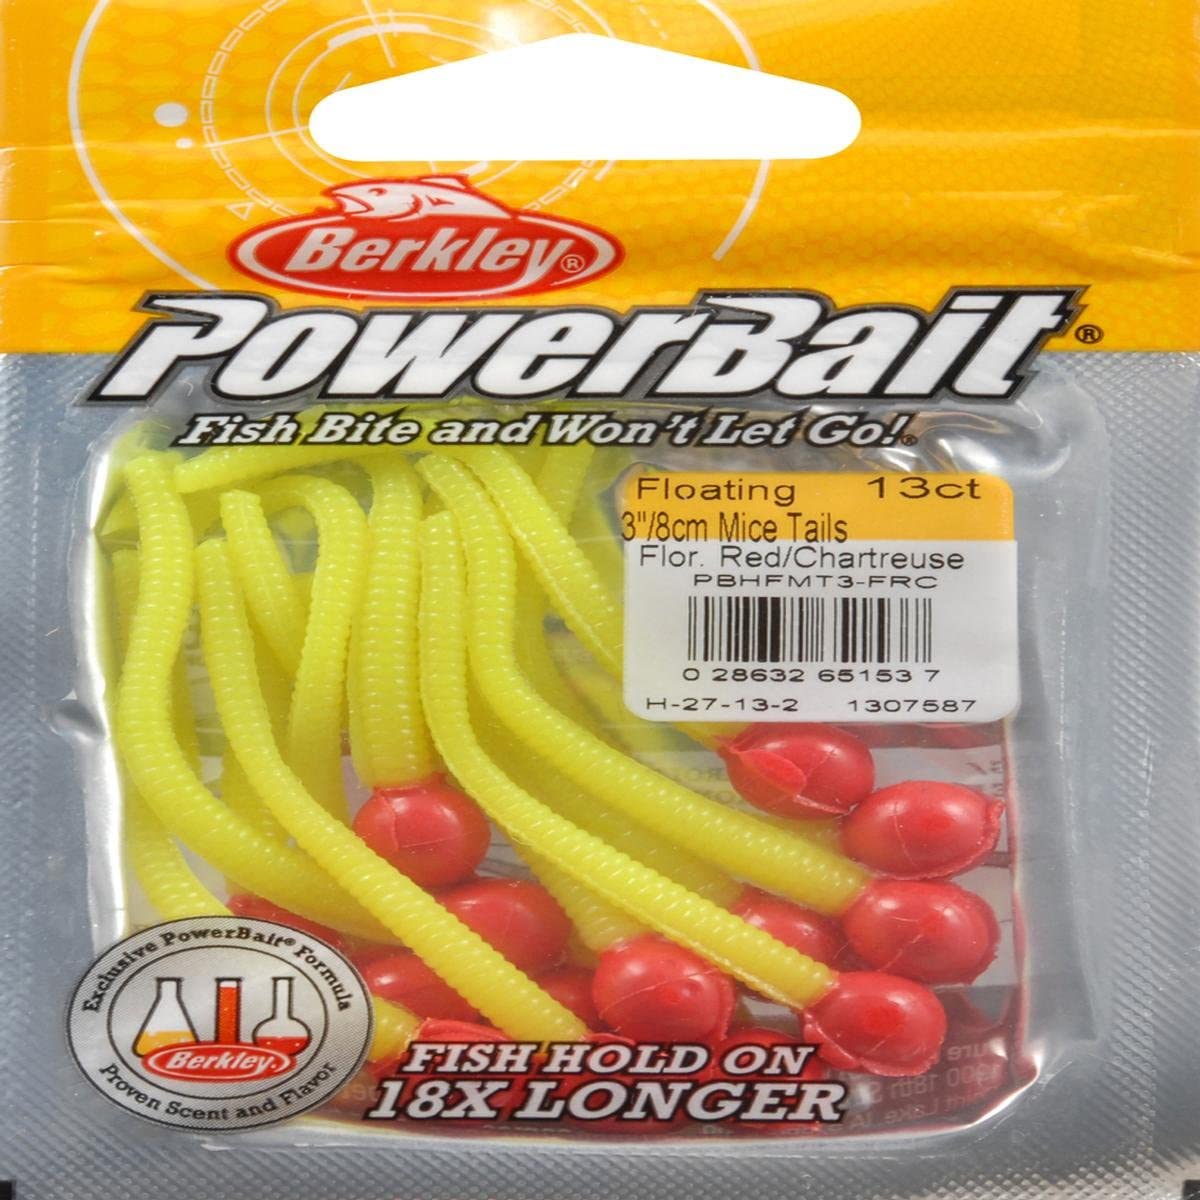 The Best Bait for Trout Fishing is PowerBait Floating Mice Tails